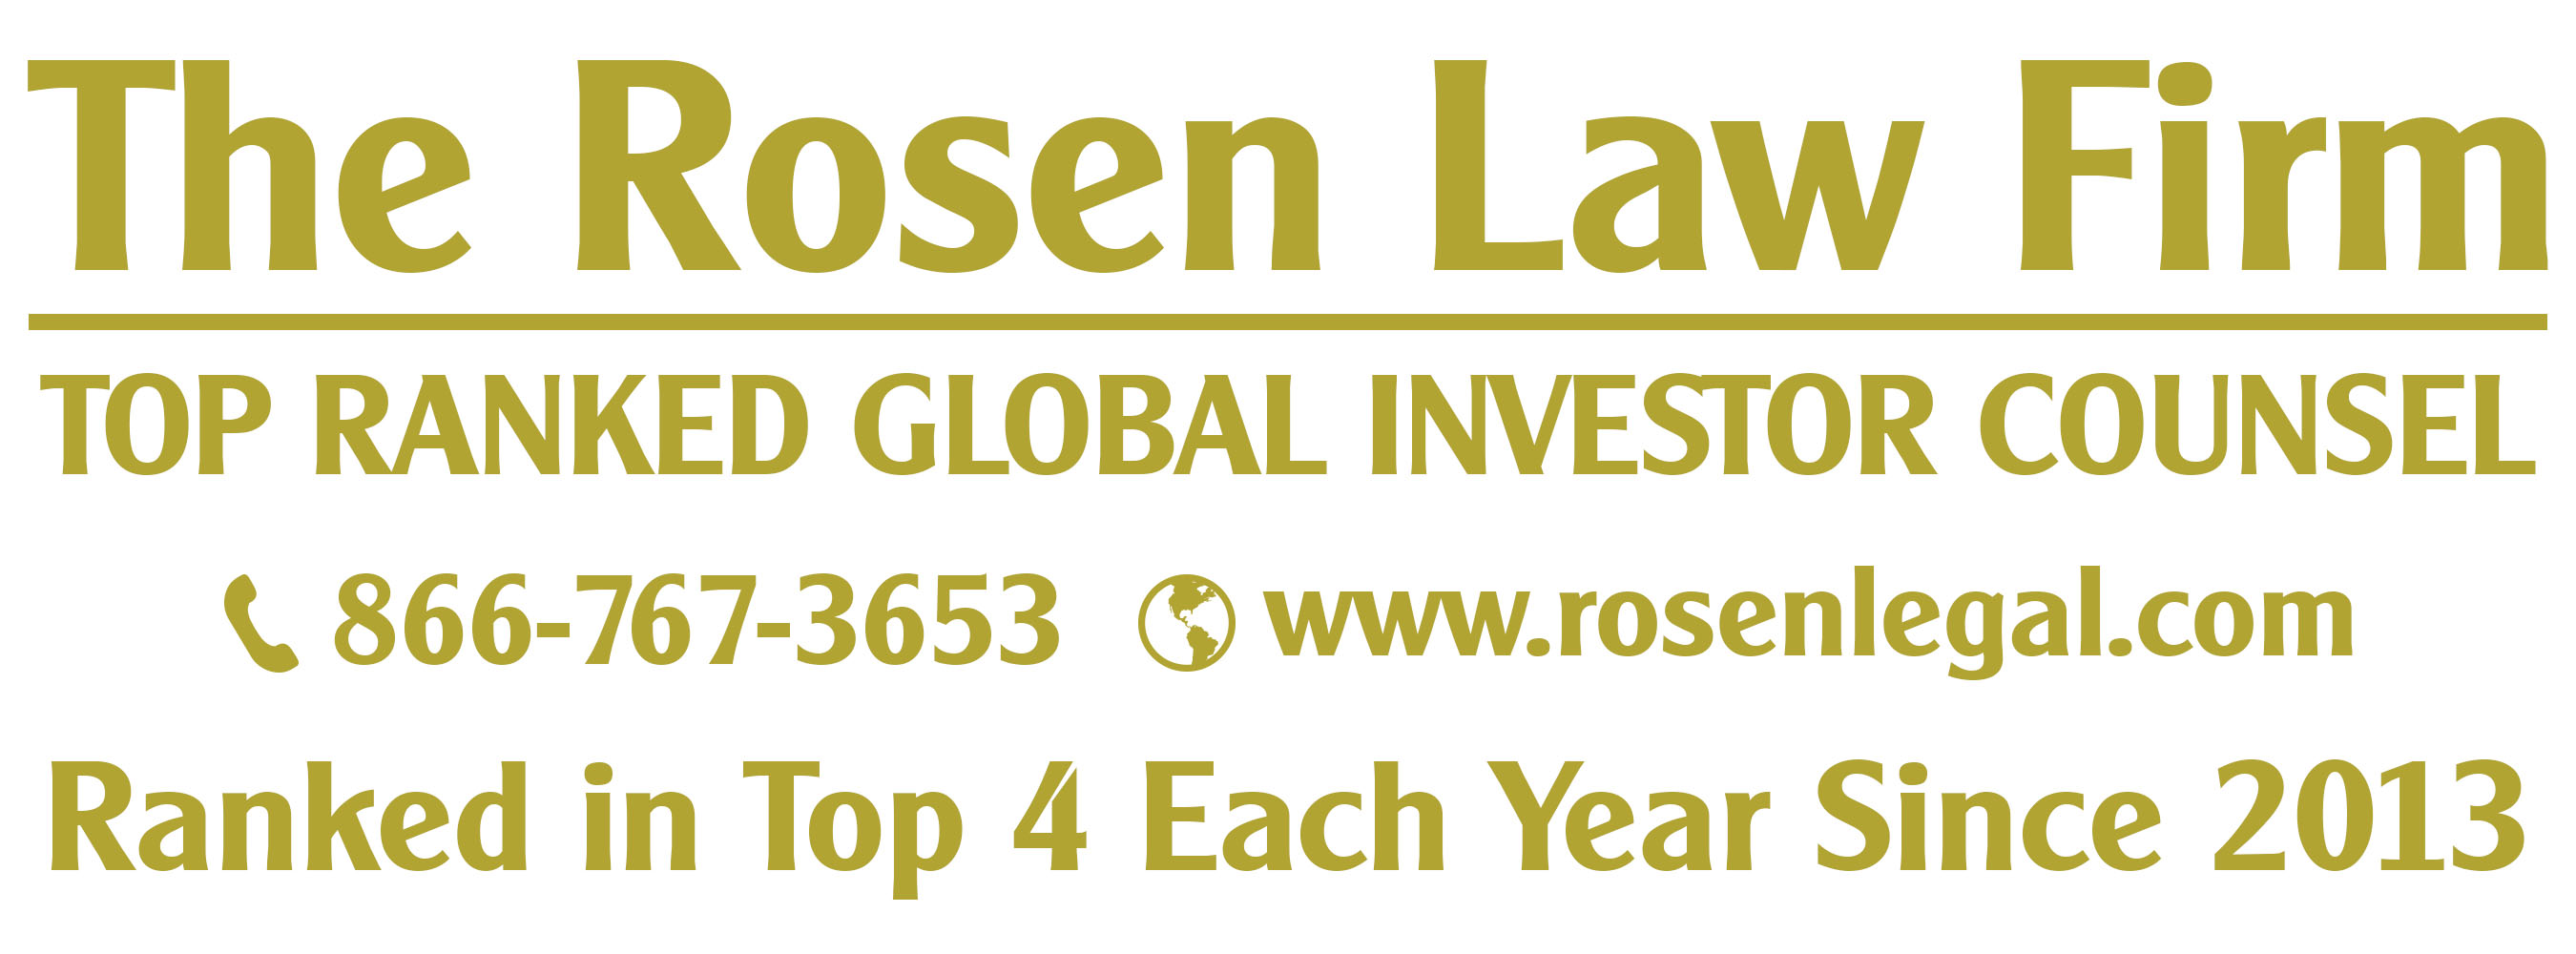 The Rosen Law Firm PA, Sunday, August 14, 2022, Press release picture